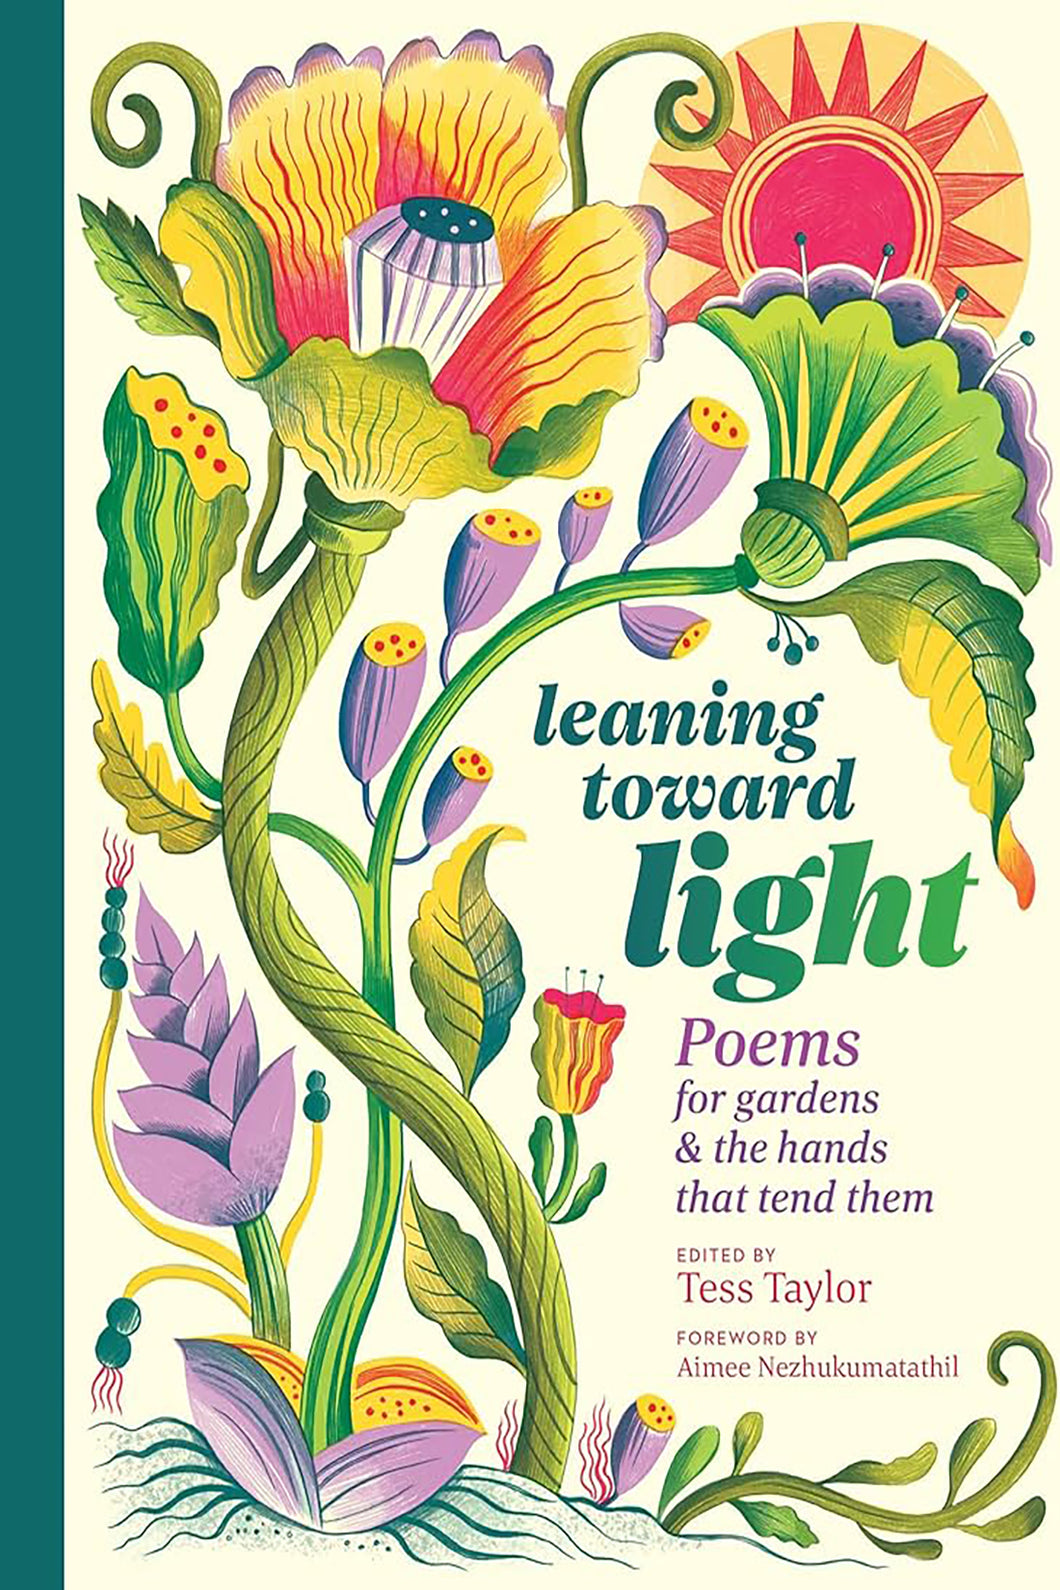 Leaning Toward Light: Poems for Gardens & the Hands That Tend Them by Tess Taylor / BOOK OR BUNDLE - Starting at $22!